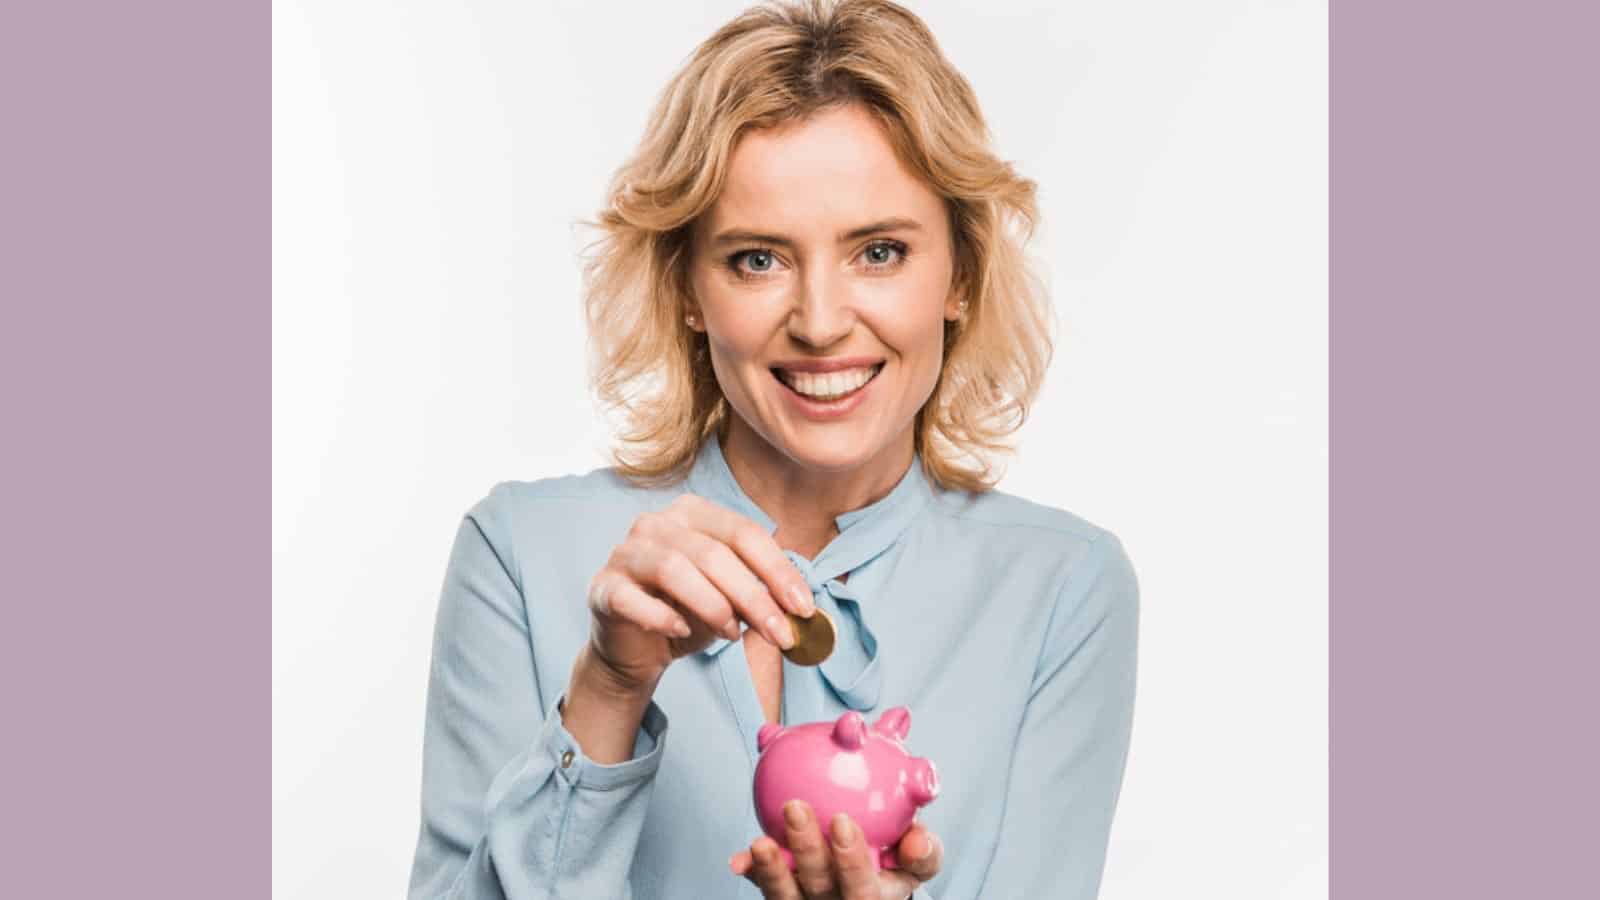 Smiling businesswoman holding piggy bank and coin